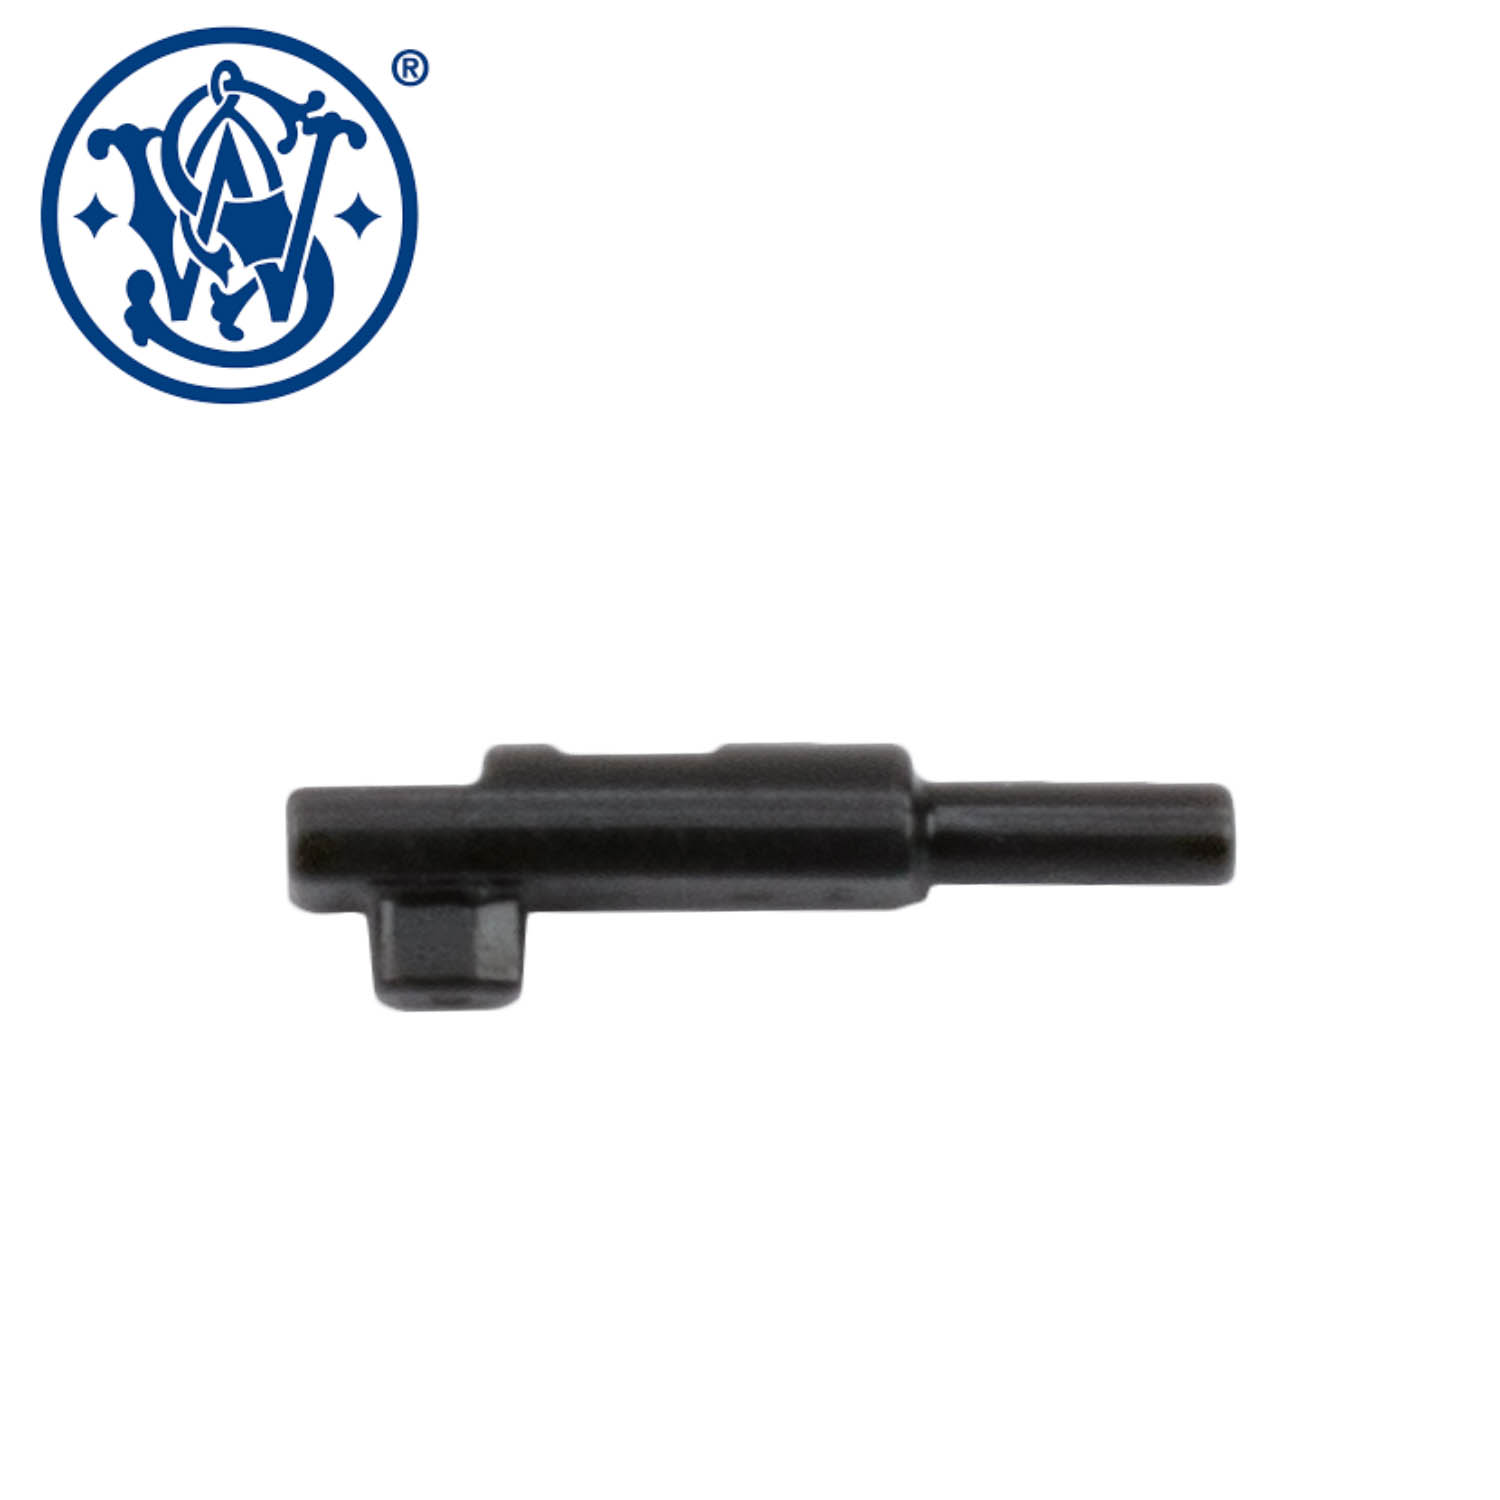 S&W Smith & Wesson M&P Victory Revolver Ejector Rod Plunger 